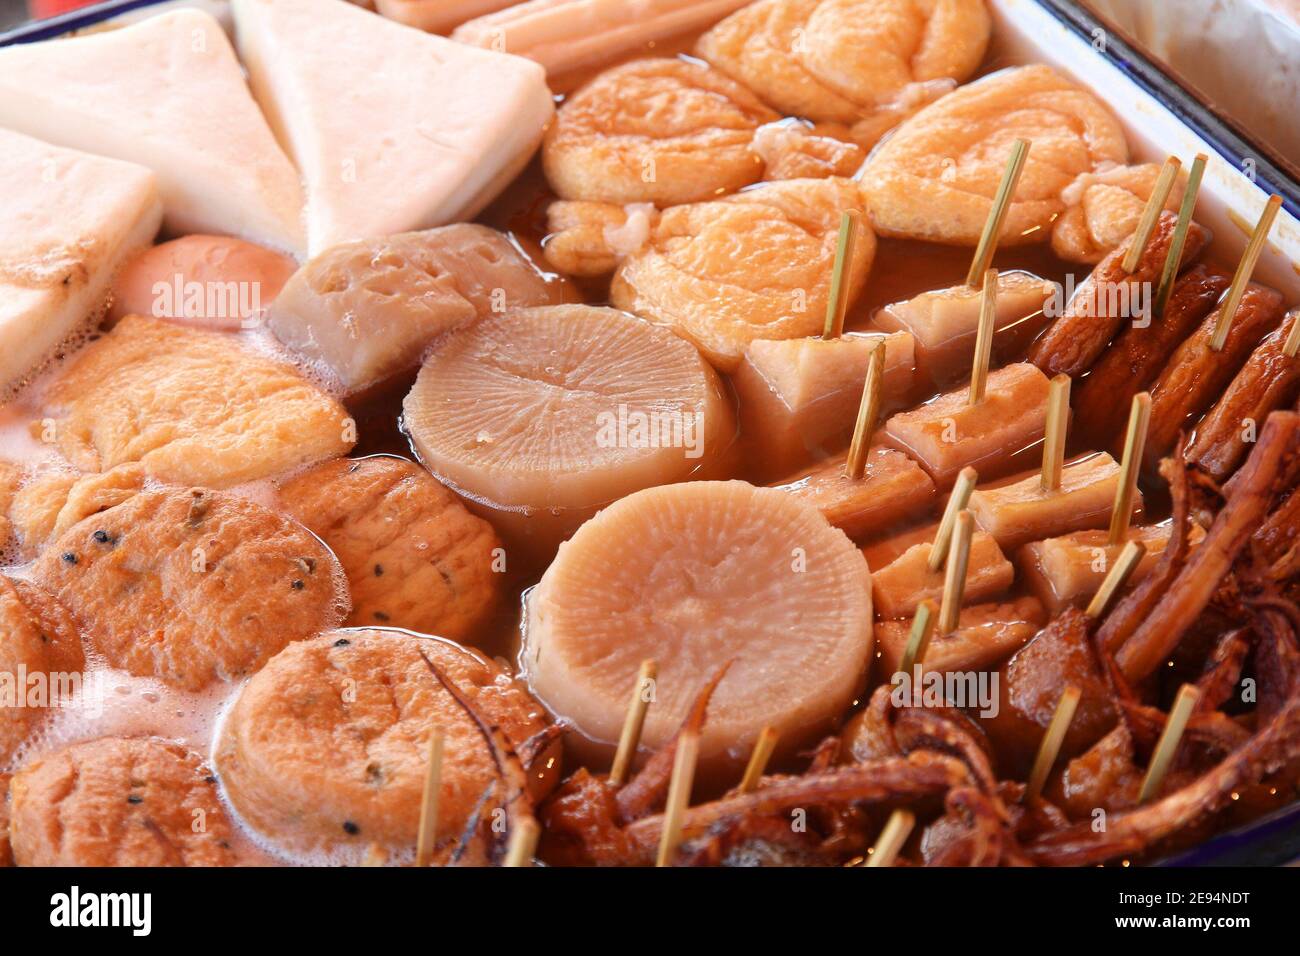 Japanese cuisine - oden food in soy broth. Typical  winter food in Japan with dumplings, tofu and daikon. Tokyo street food. Stock Photo